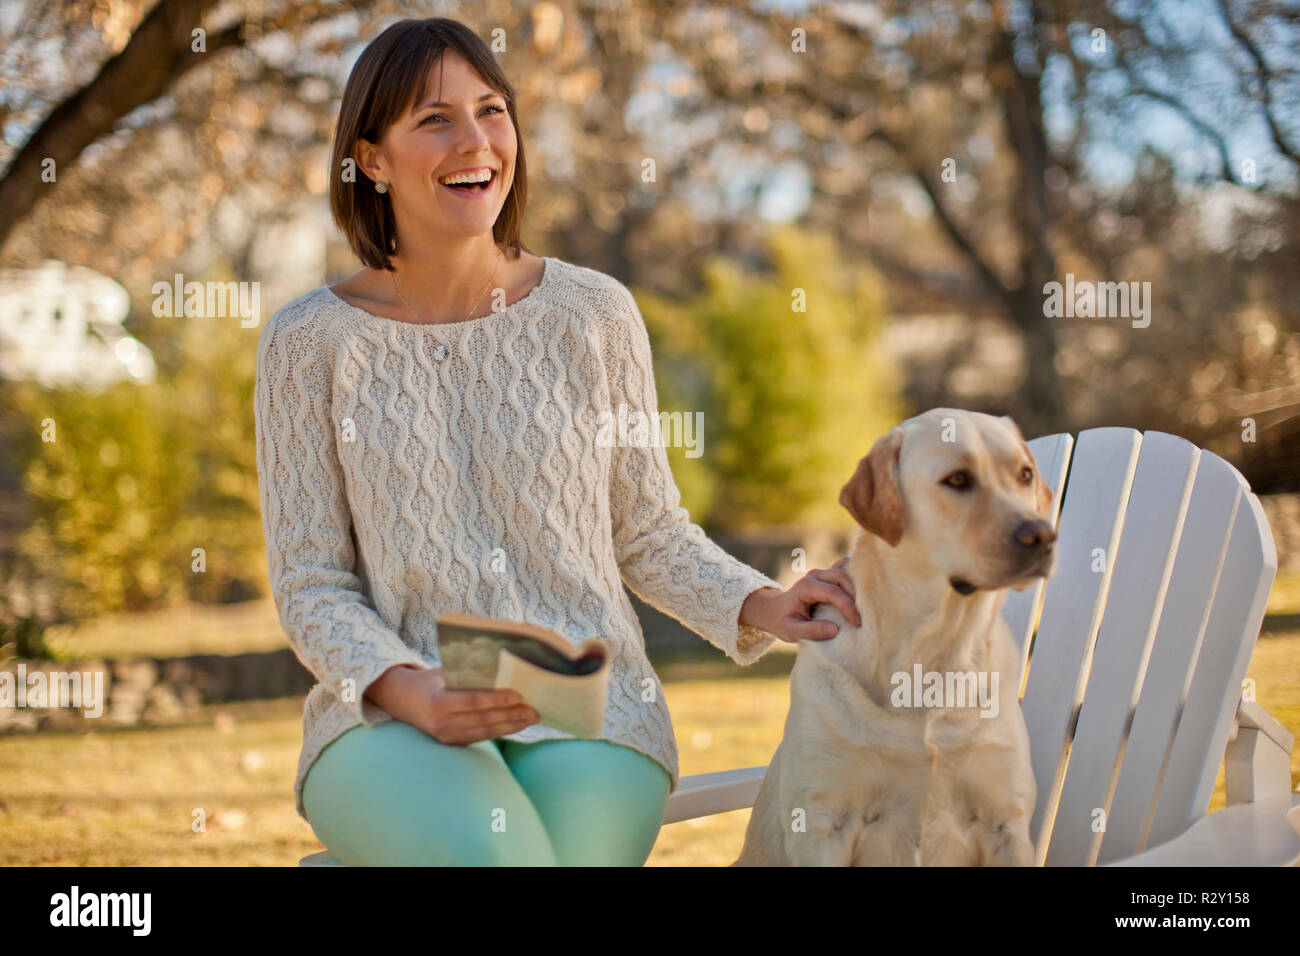 Smiling young woman relaxing with her dog and a book in a sunlit garden. Stock Photo